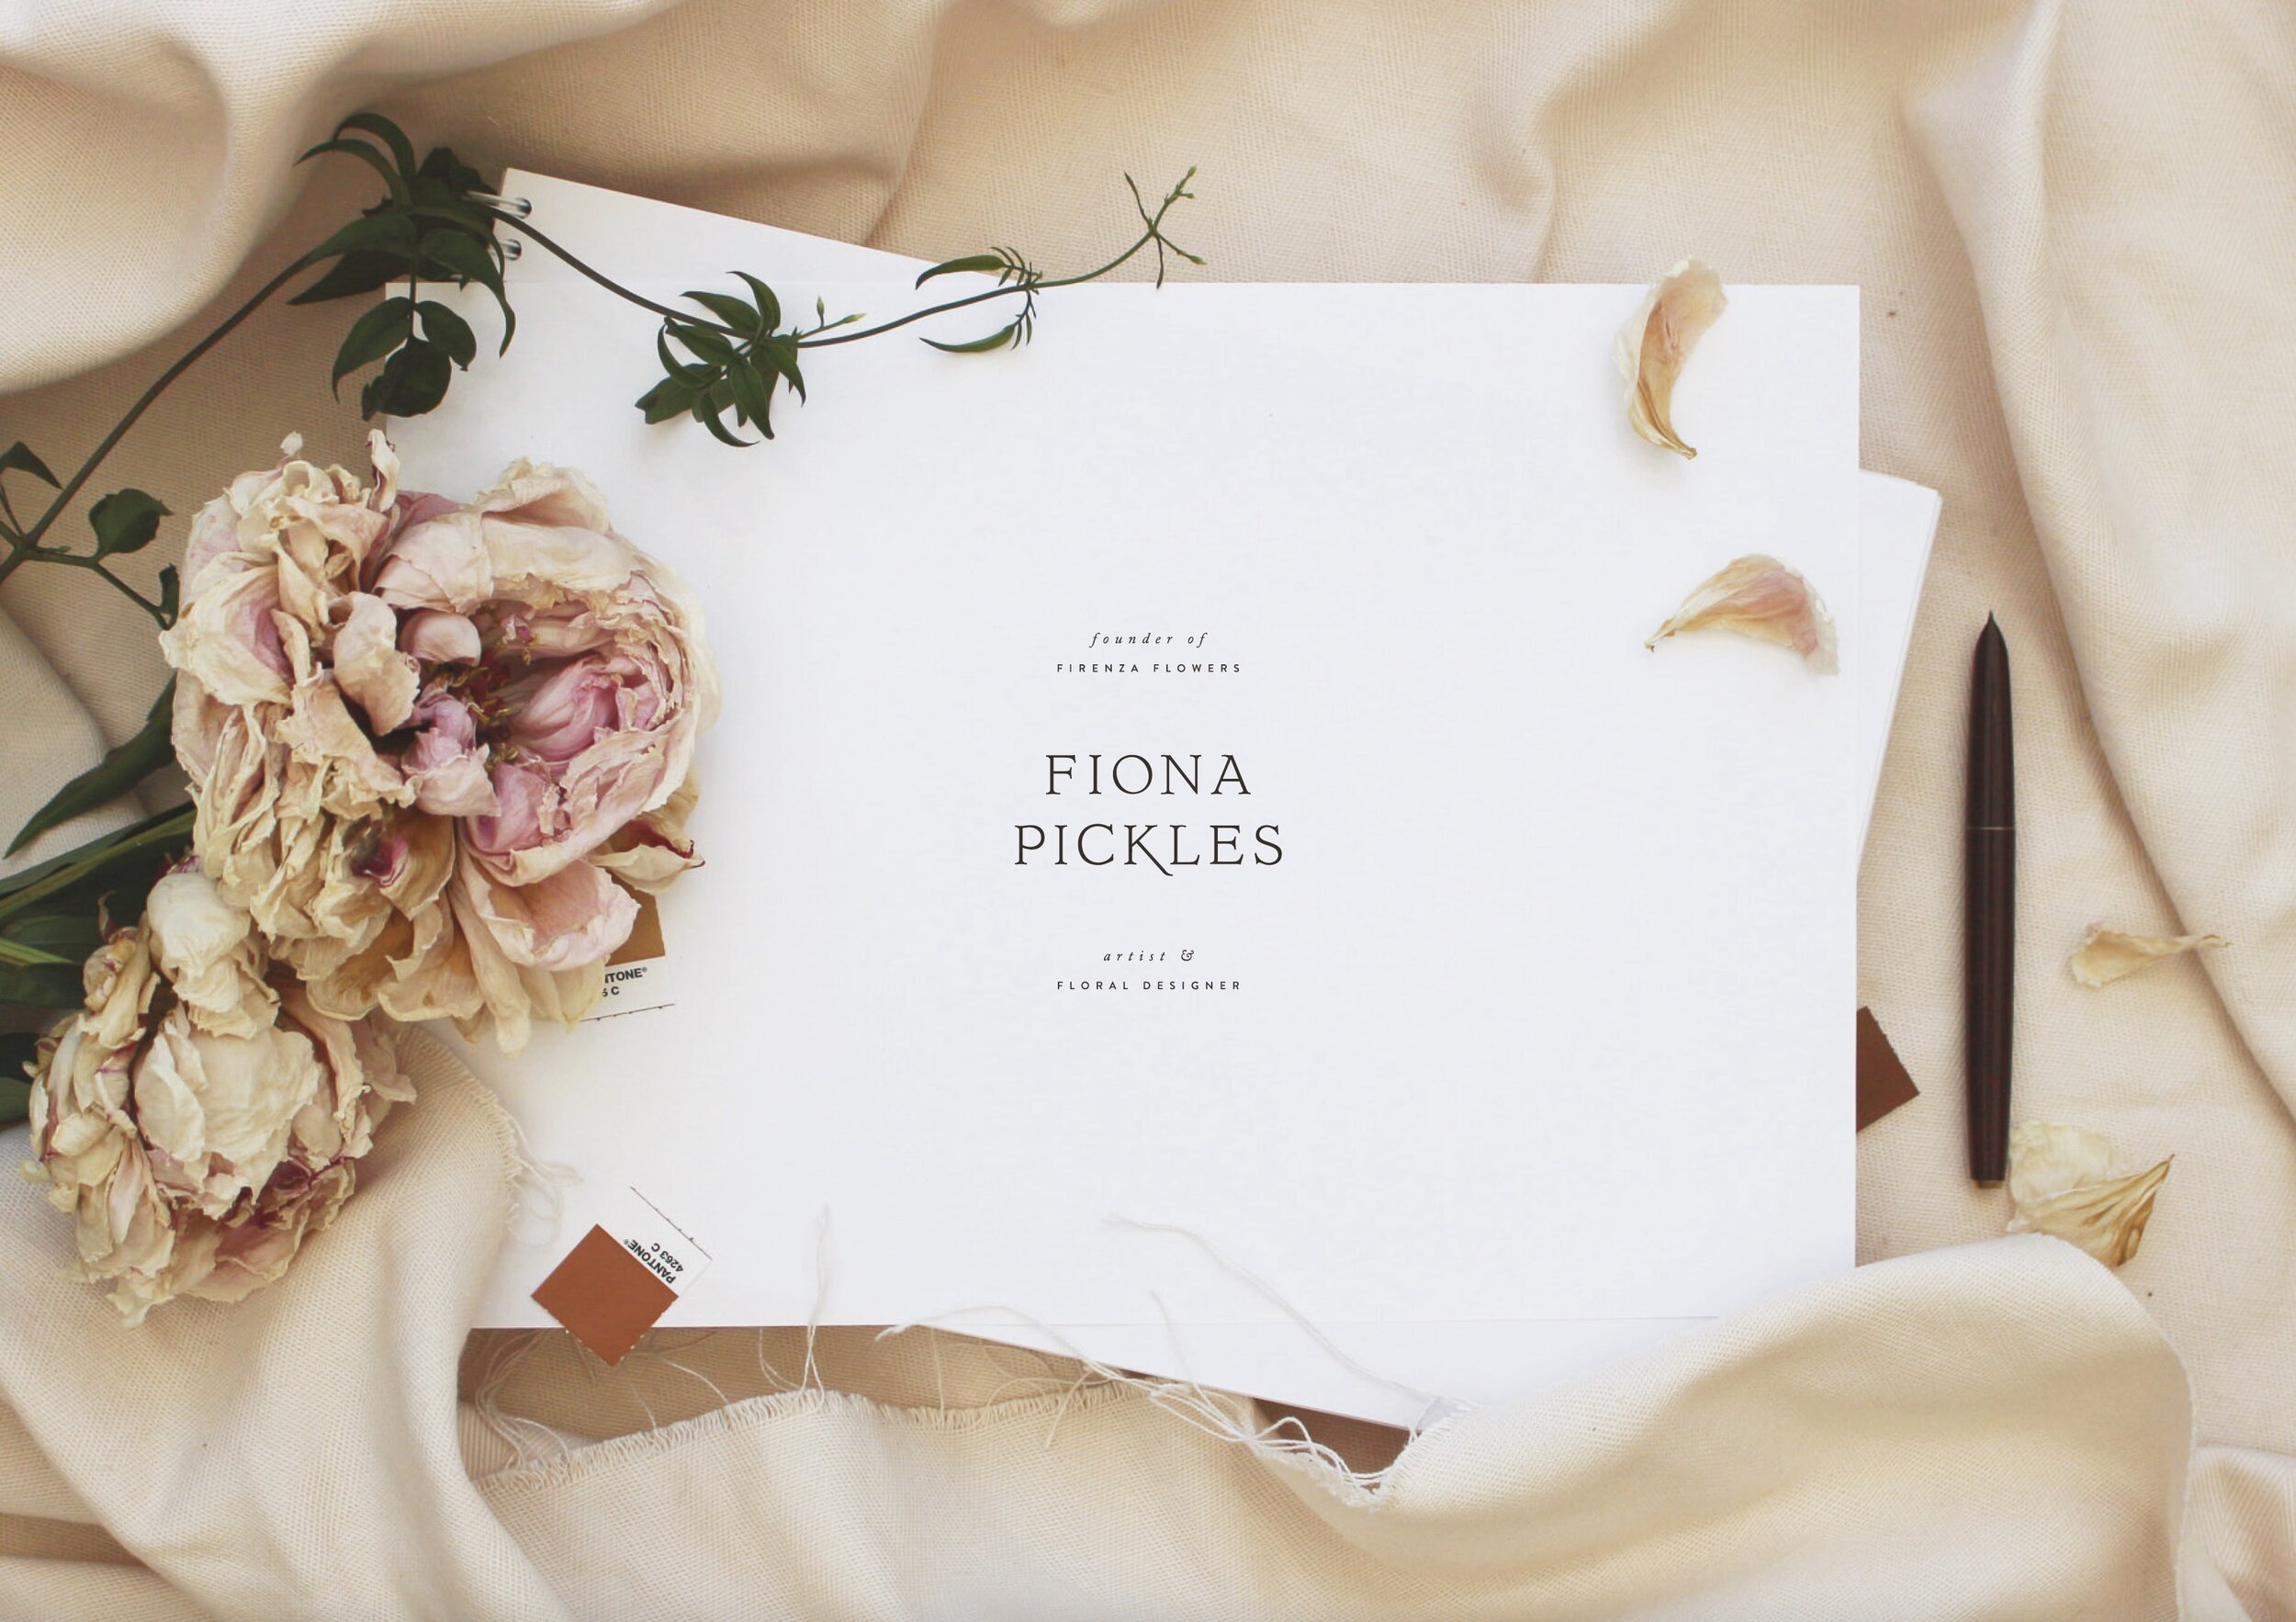 A beautiful brand identity design for renowned floral designer and